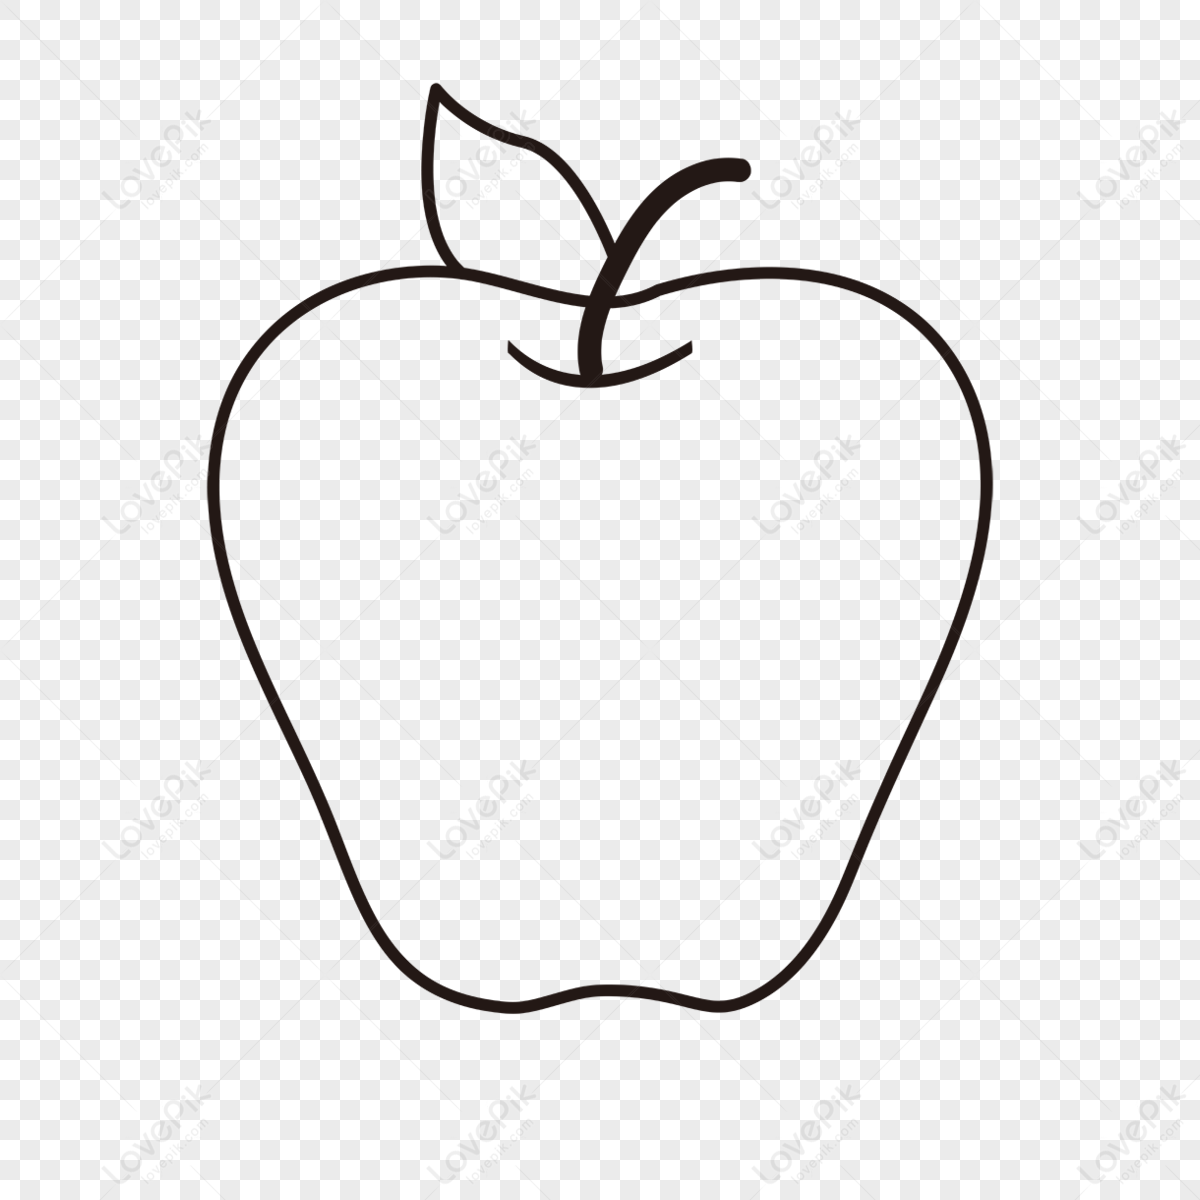 Apple Drawing - How To Draw An Apple Step By Step